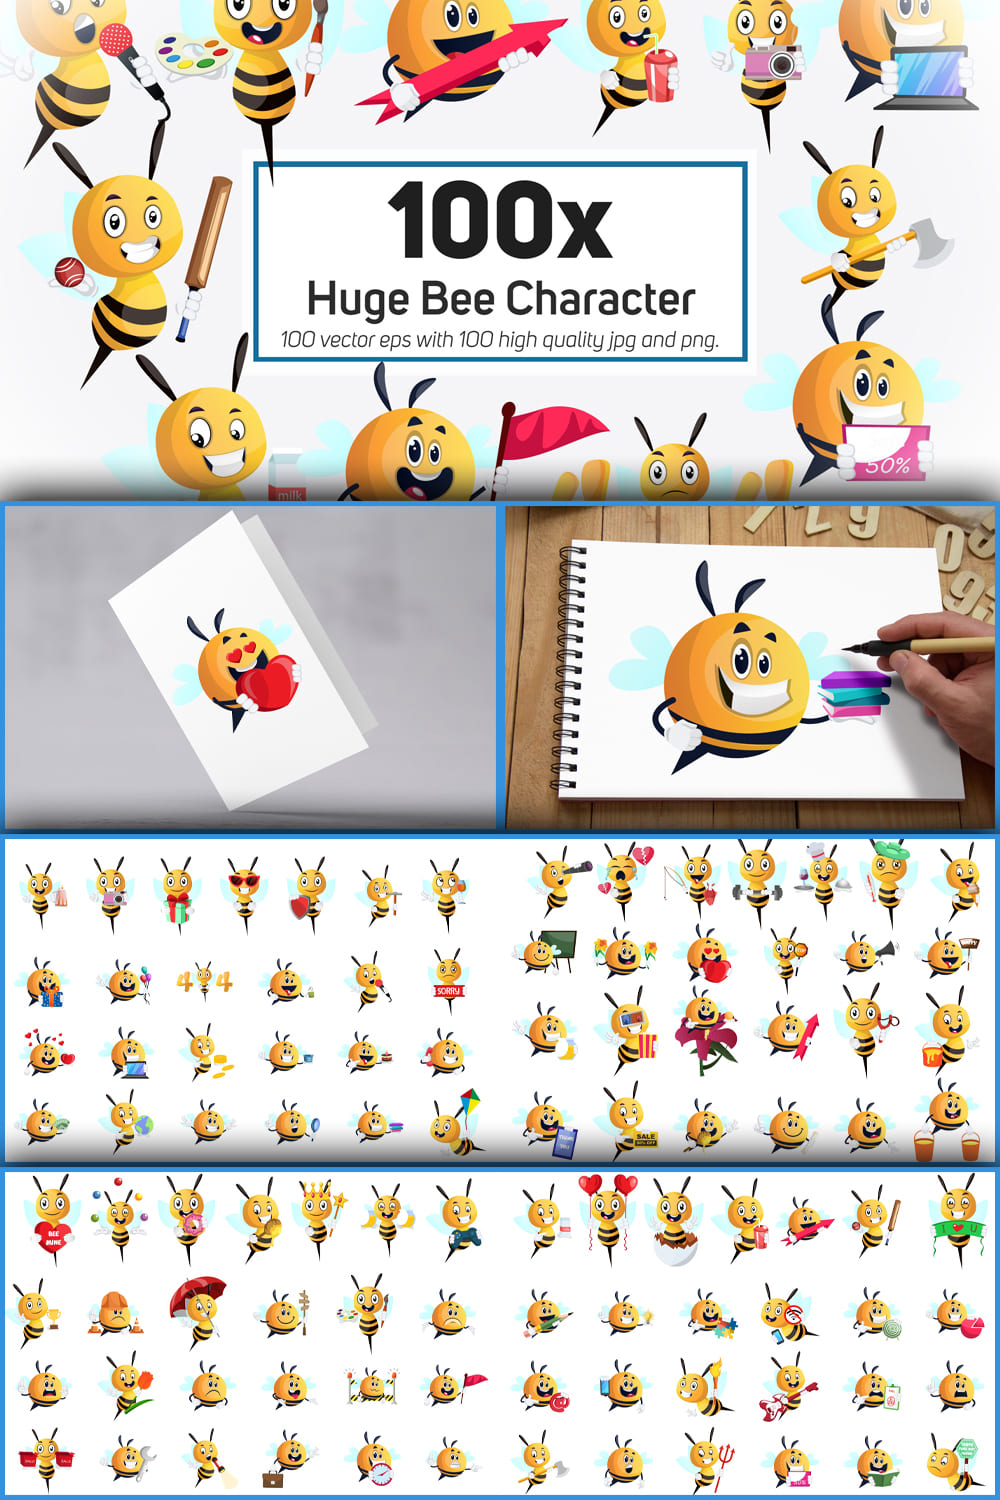 Huge bee character collection illustration of pinterest.